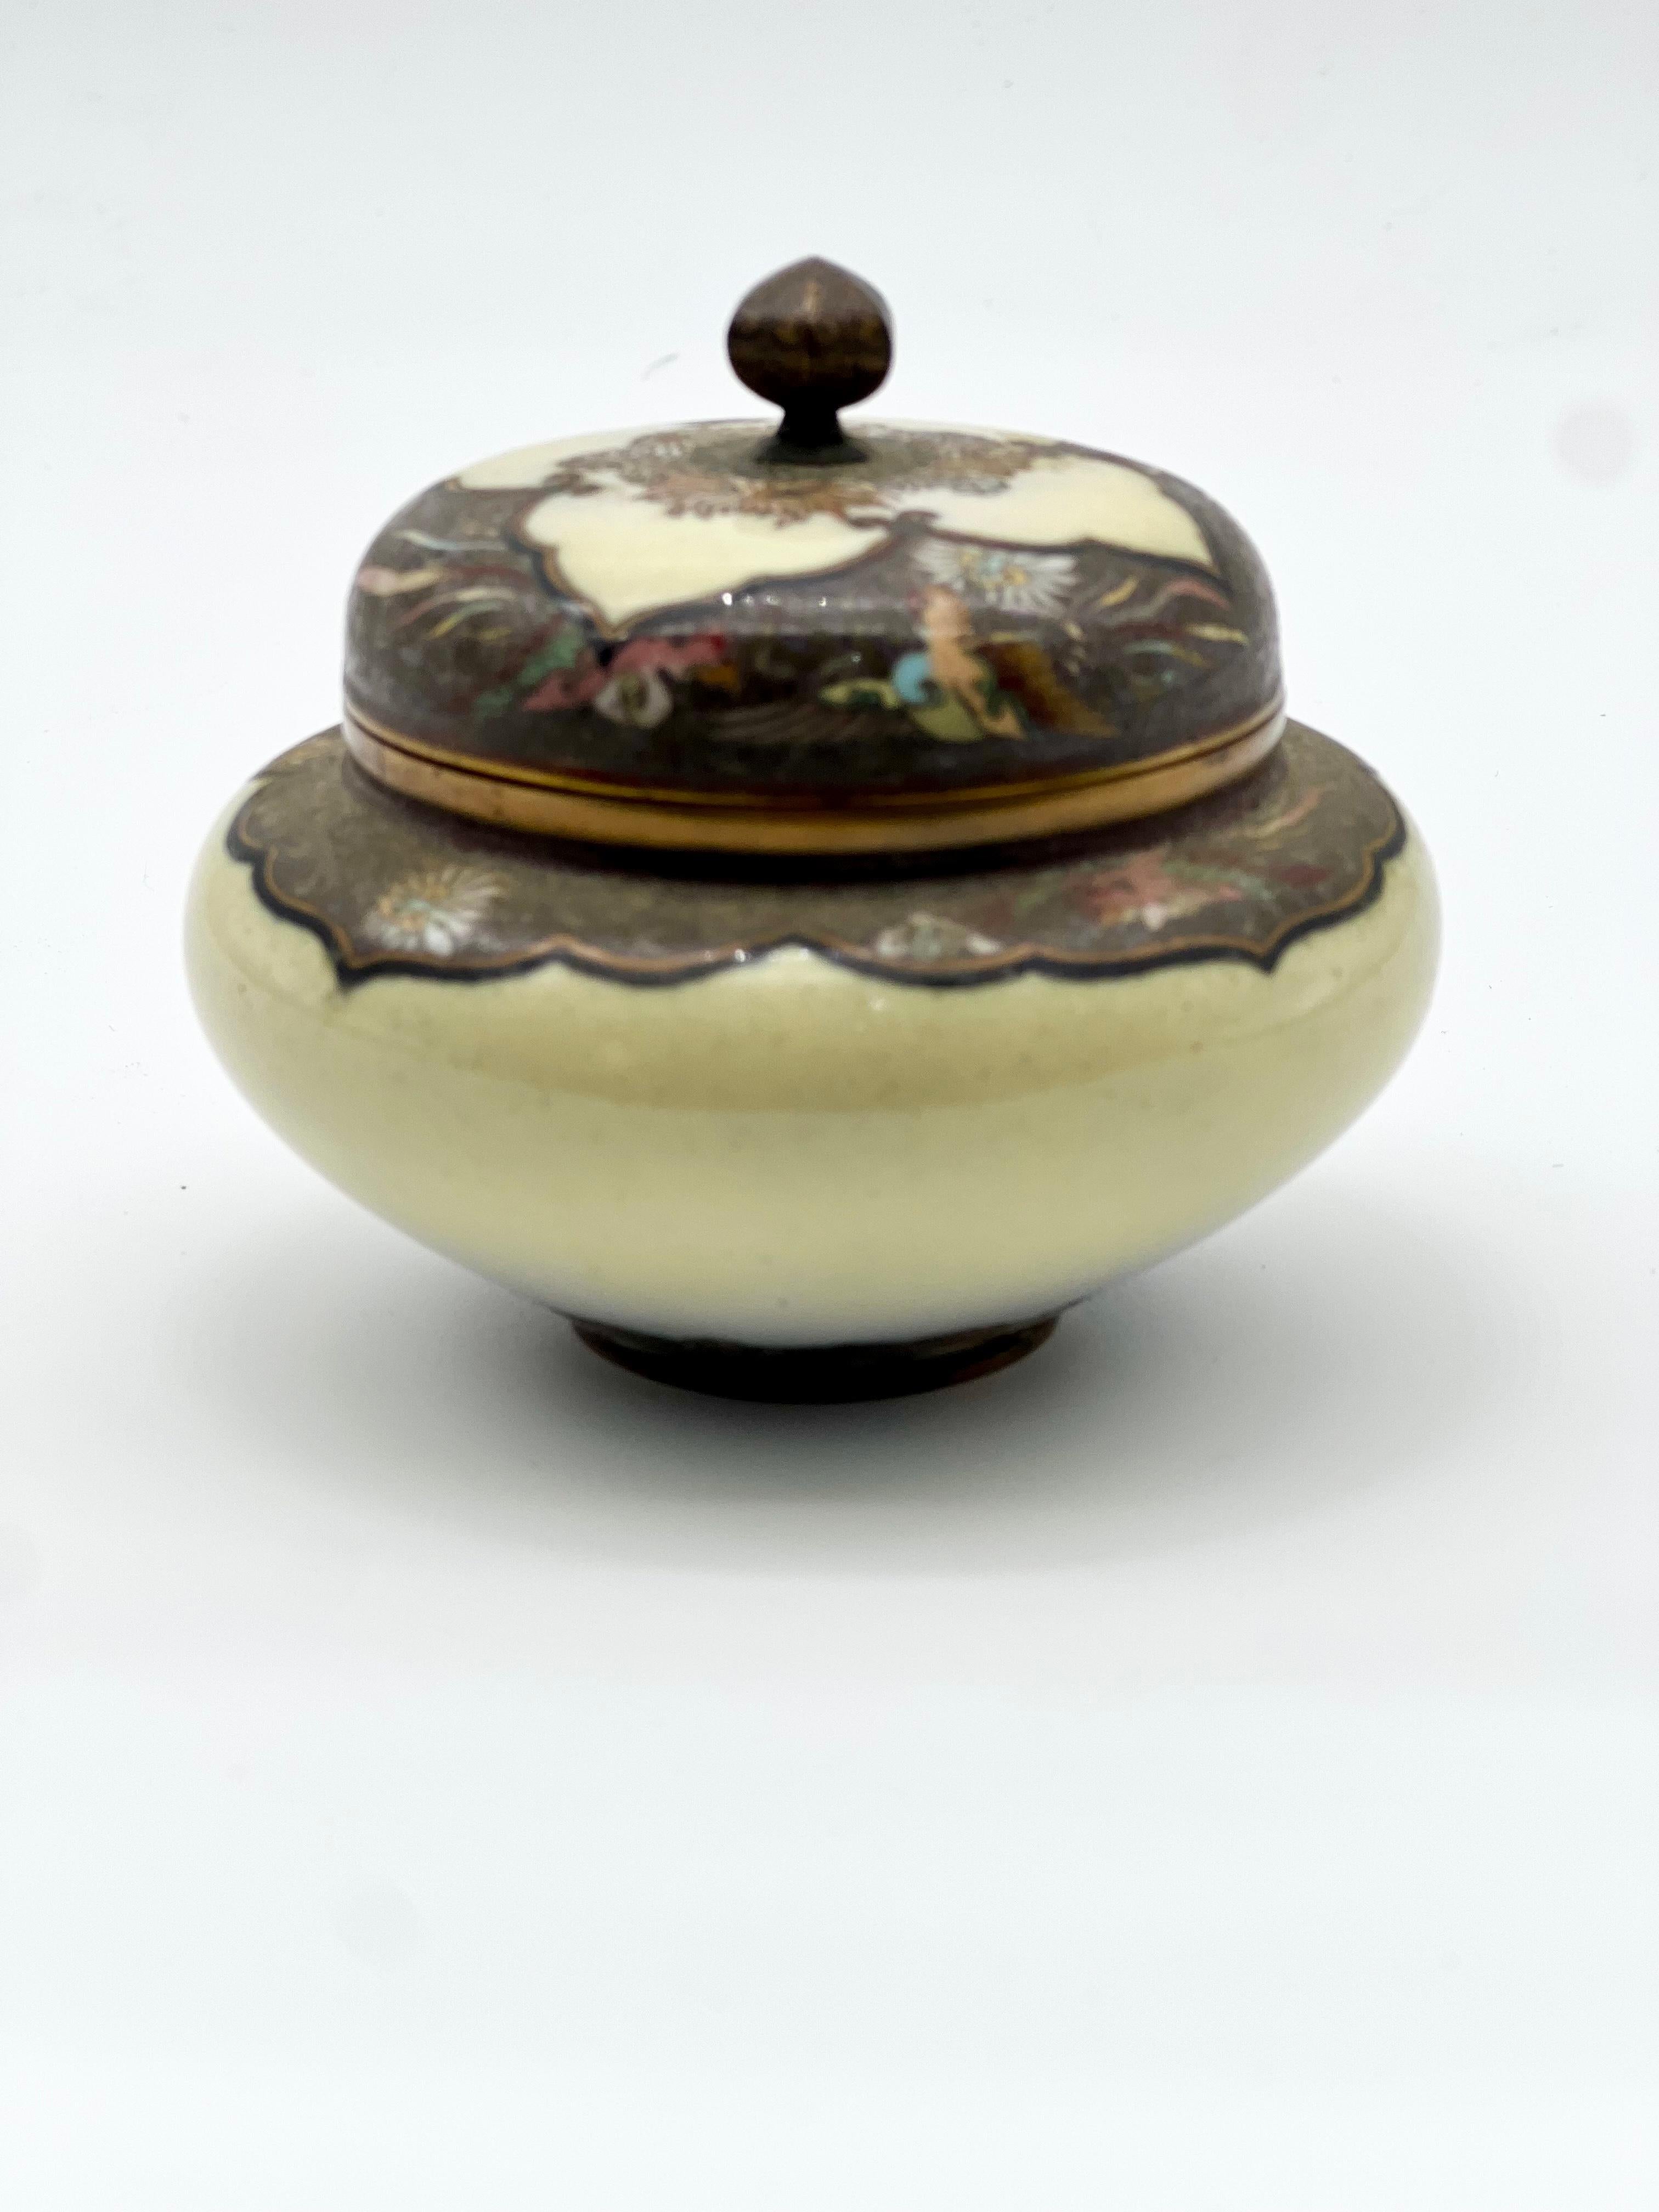 Exquisite Cloisonné Enamel Vase and Cover in the Manner of Namikawa Yasuyuki For Sale 10